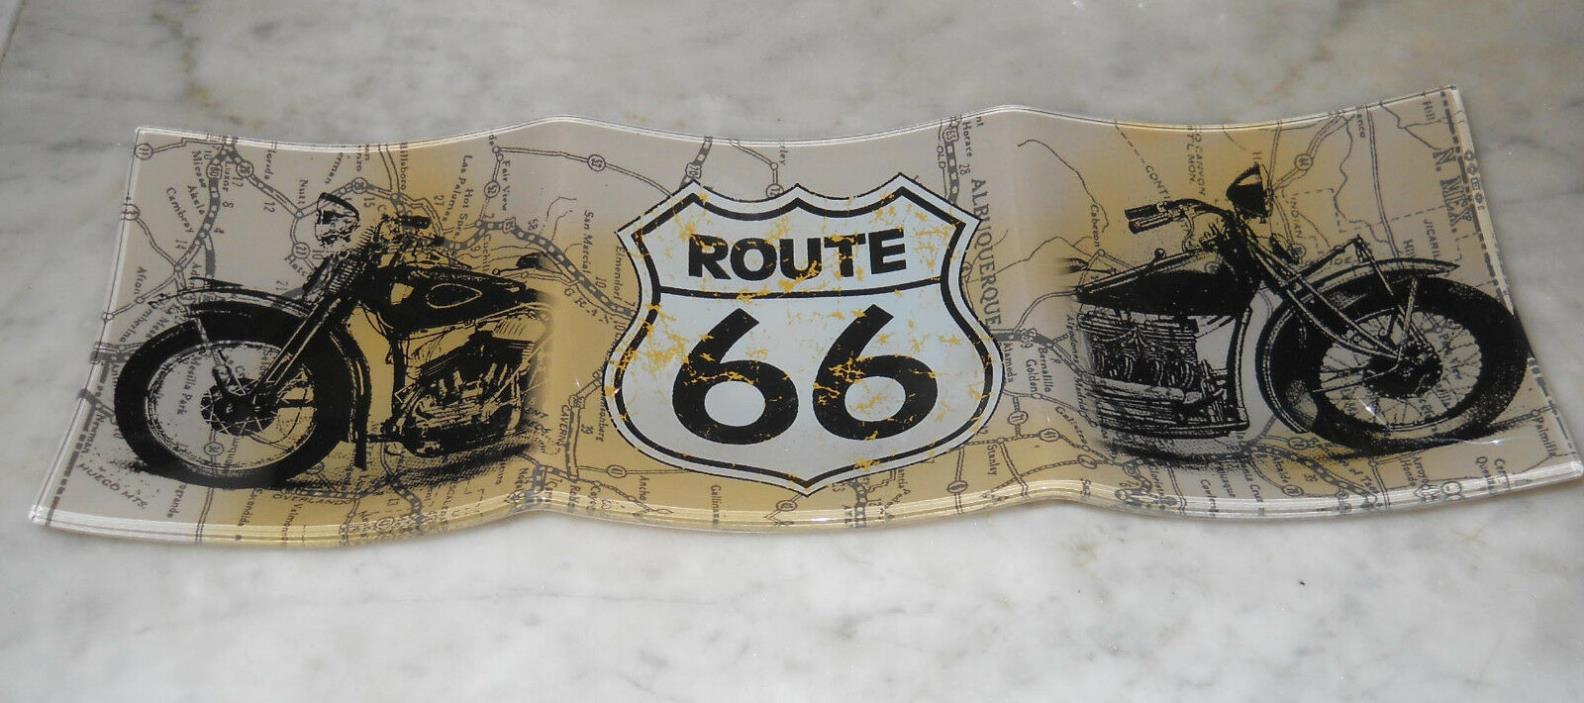 ROUTE 66 GLASS TRAY WITH MOTORCYCLES ON EACH SIDE AND RT 66 SIGN IN CENTER